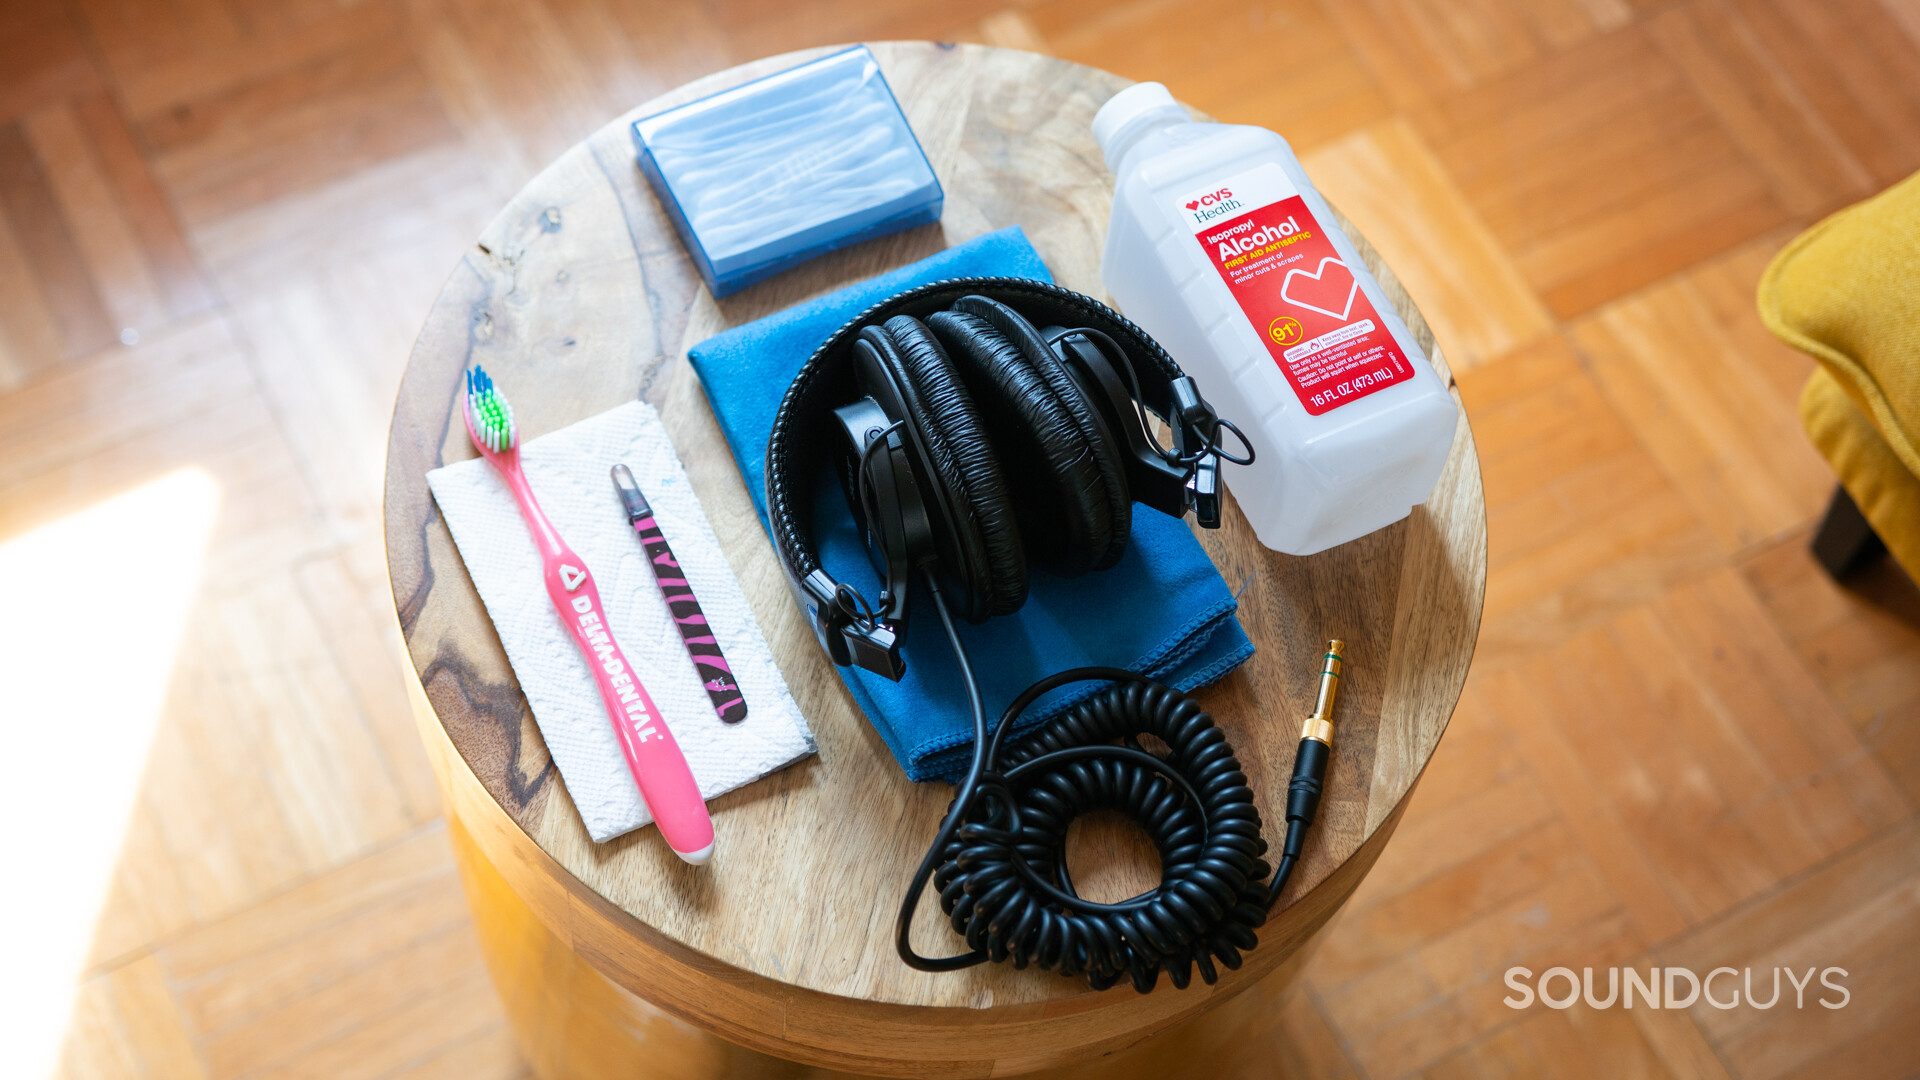 Sony headphones on a wooden stool with cleaning supplies in the sun